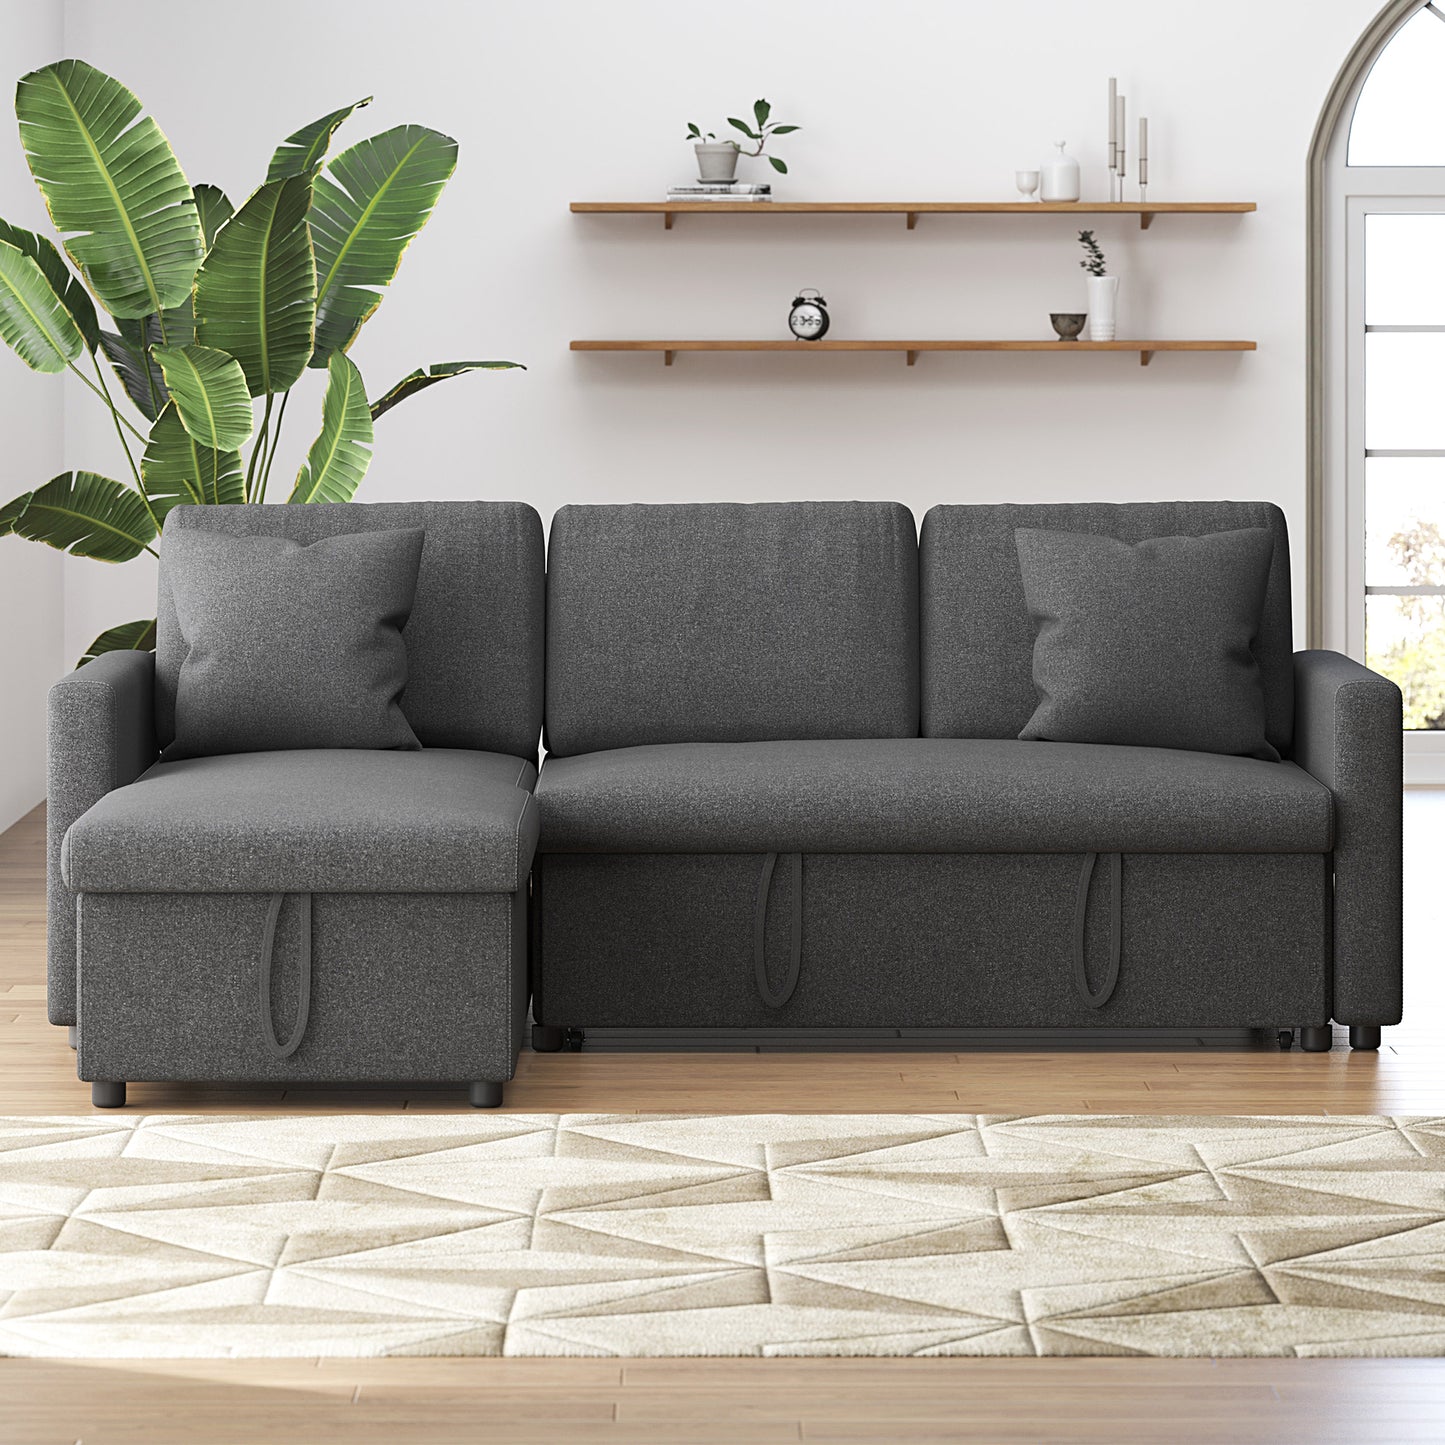 SogesPower 85" Sofa Set with Storage Chaise, Linen Fabric 3 Seater Couch, Dark Gray